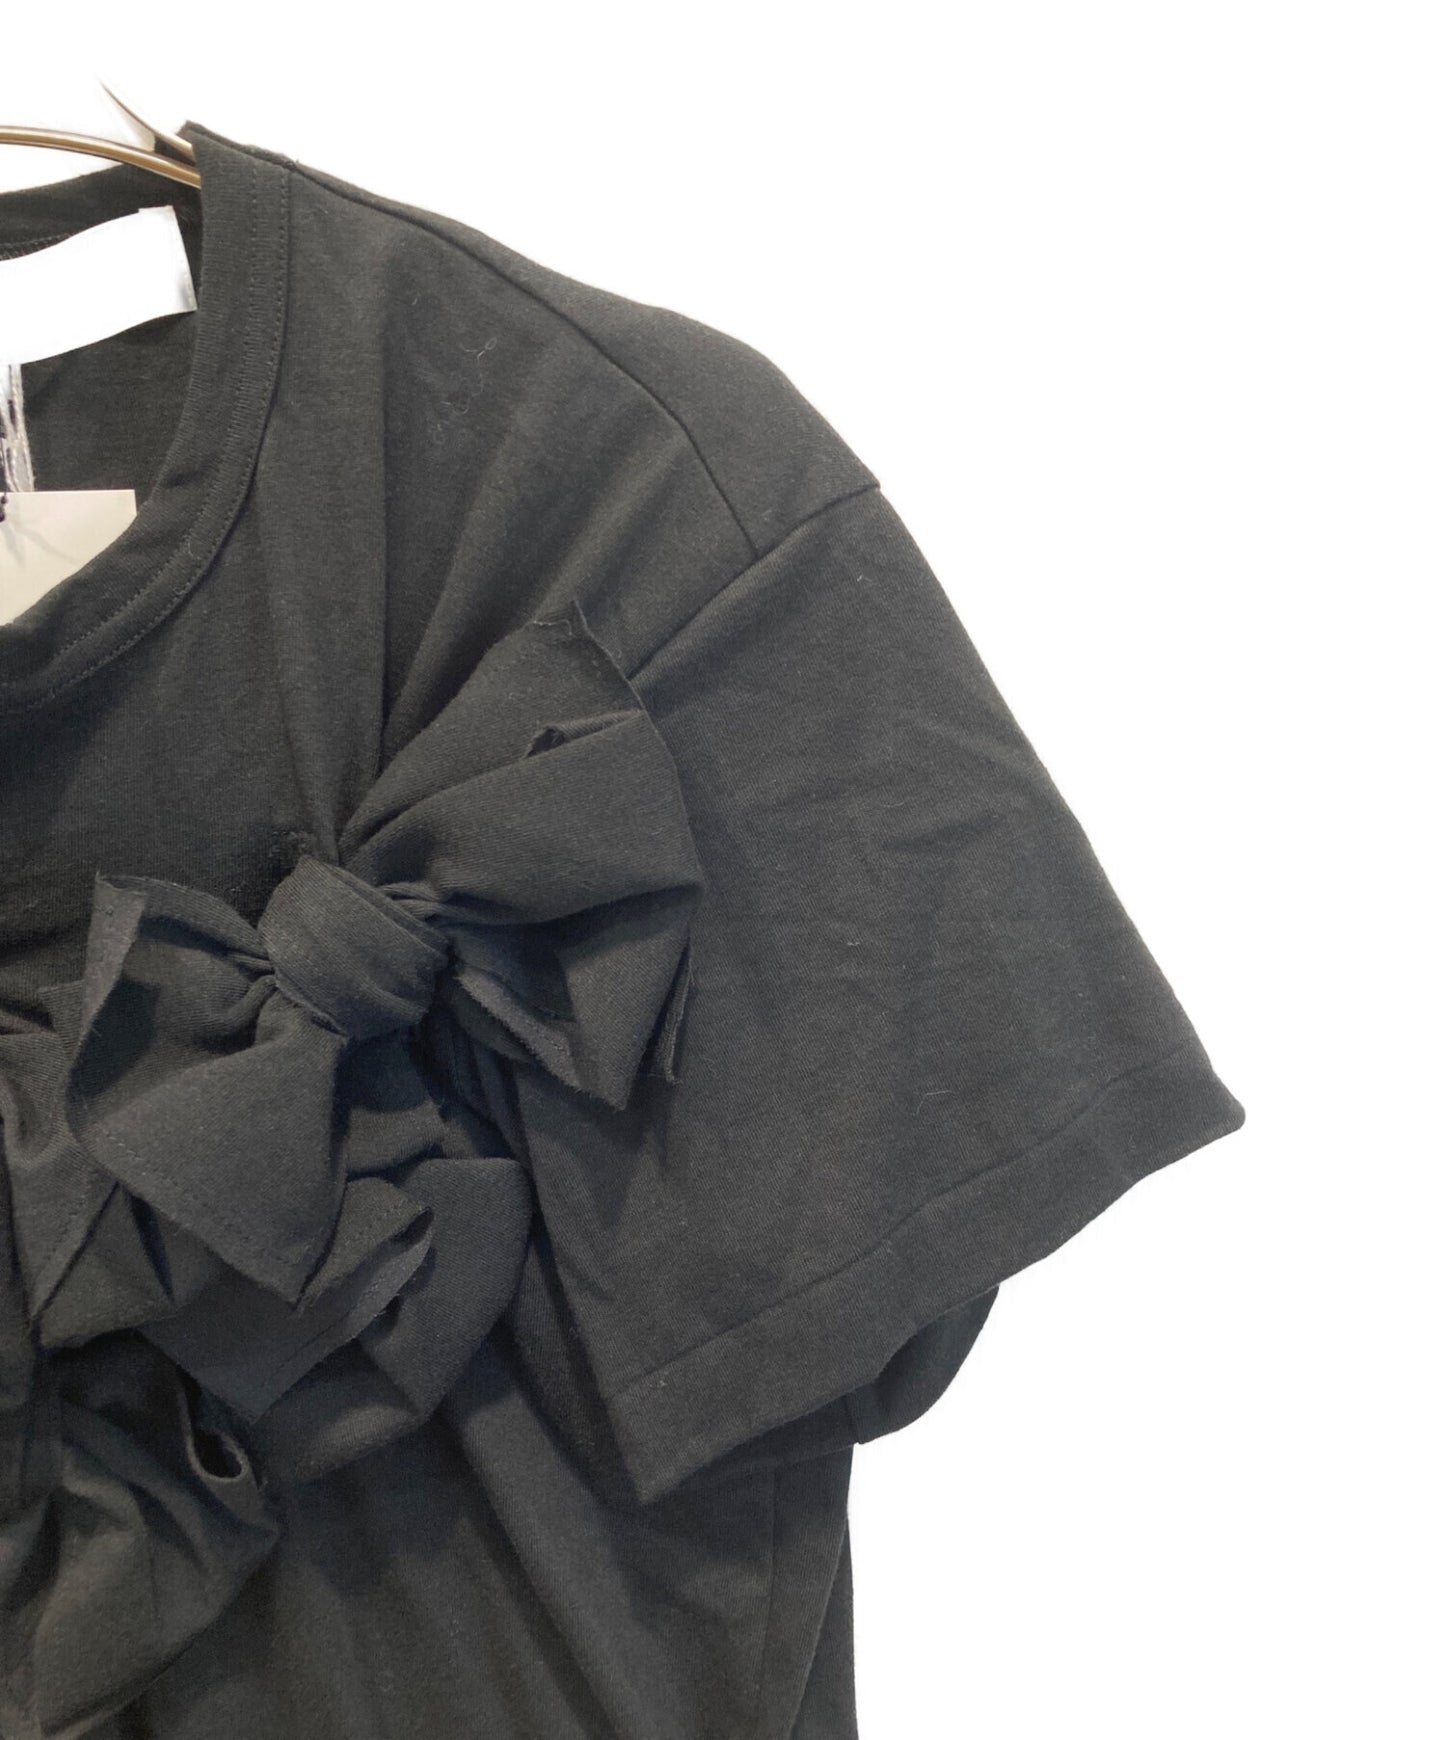 [Pre-owned] TAO COMME des GARCONS Ribbon detail T-shirt, short sleeves, short sleeves, crew neck, cotton TK-T020